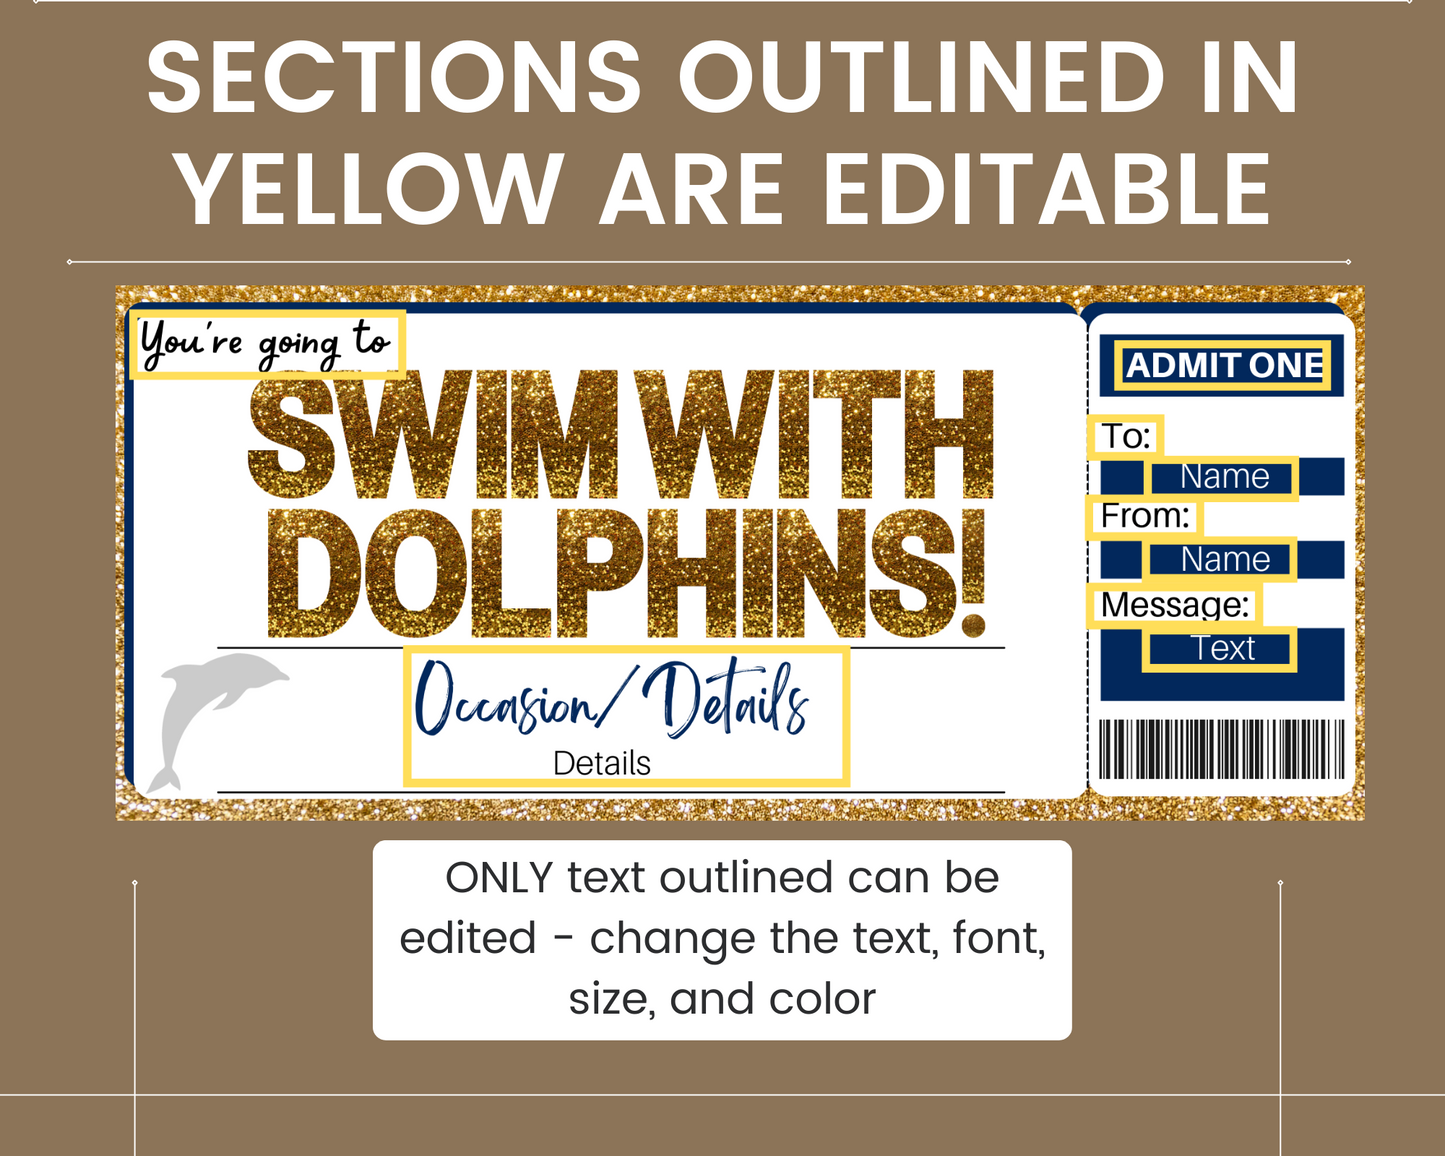 Swimming with Dolphins Gift Ticket Template